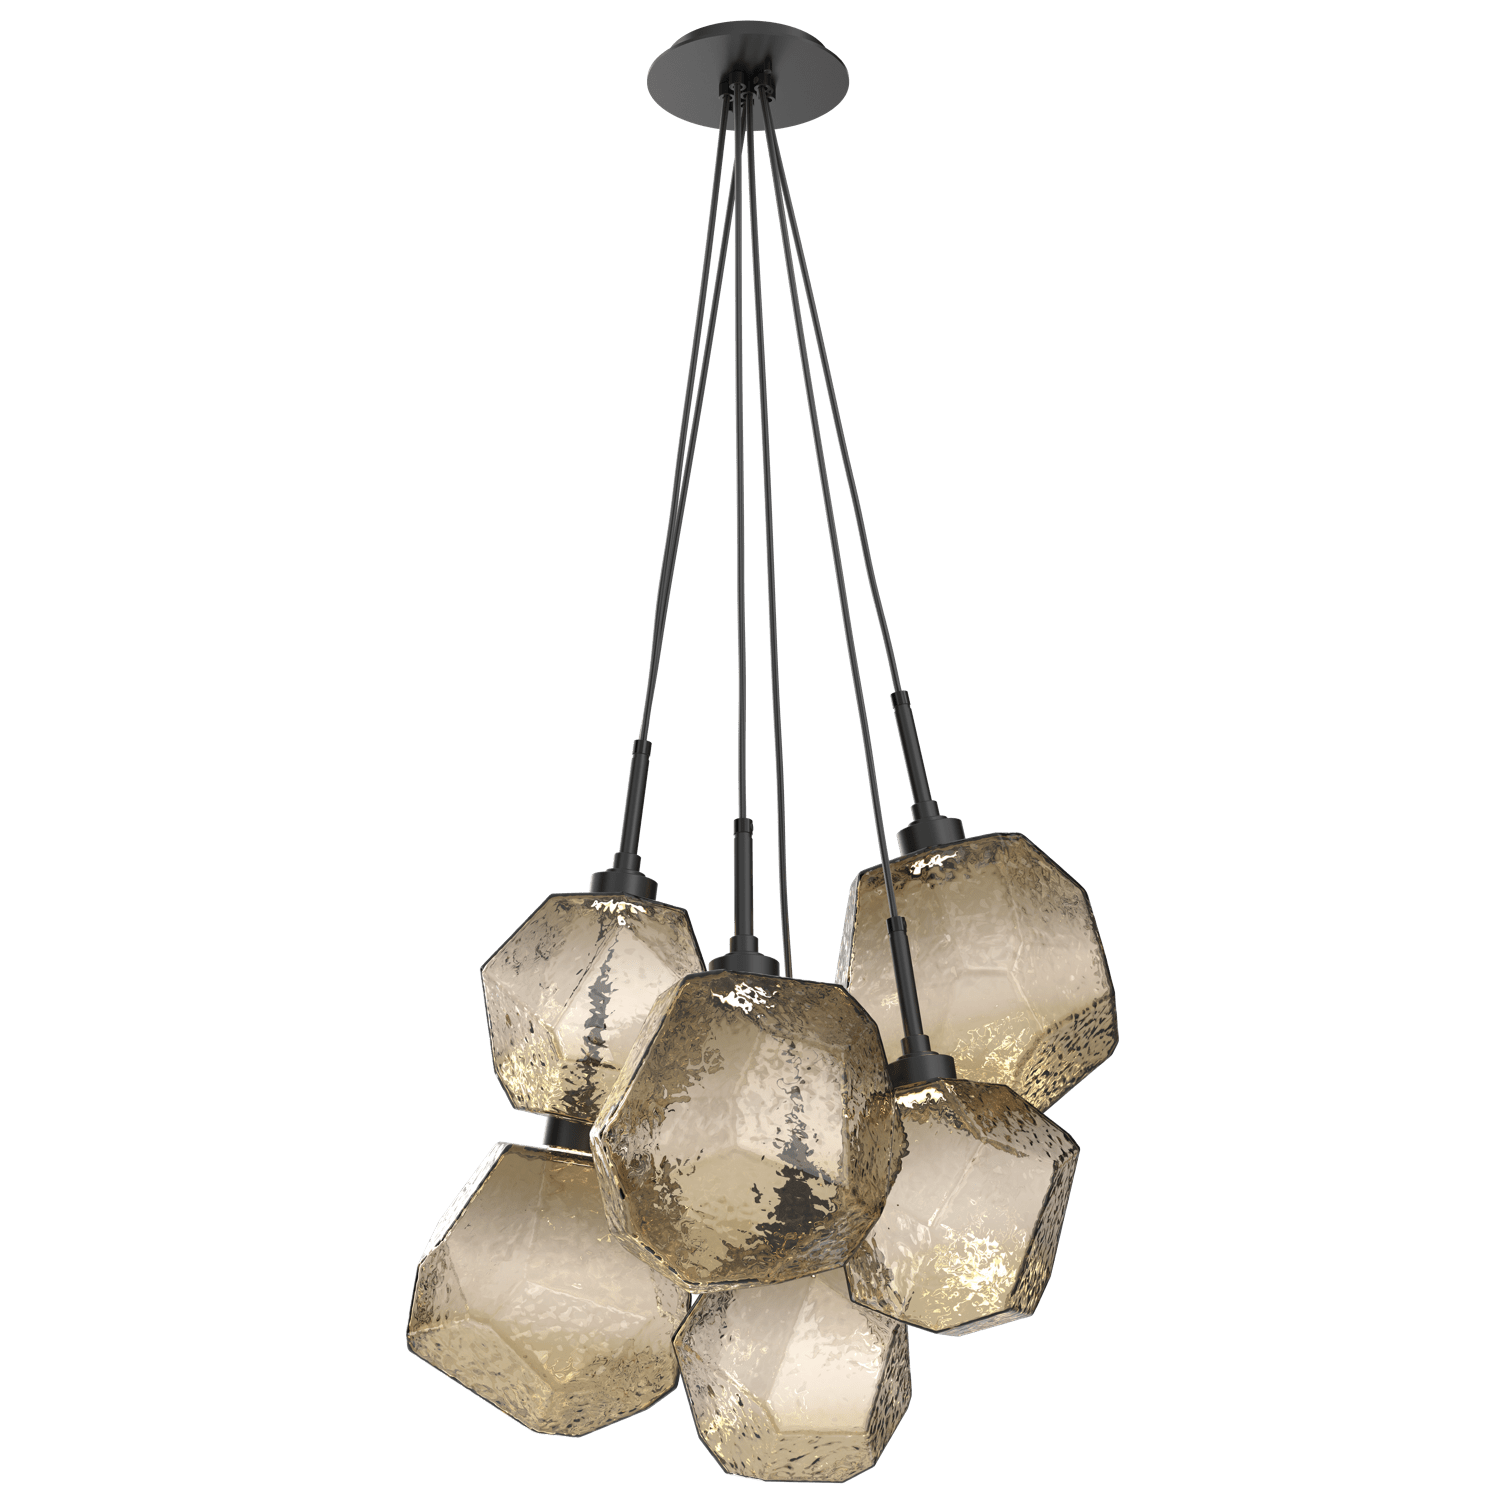 CHB0039-0F-MB-B-Hammerton-Studio-Gem-6-light-cluster-pendant-light-with-matte-black-finish-and-bronze-blown-glass-shades-and-LED-lamping